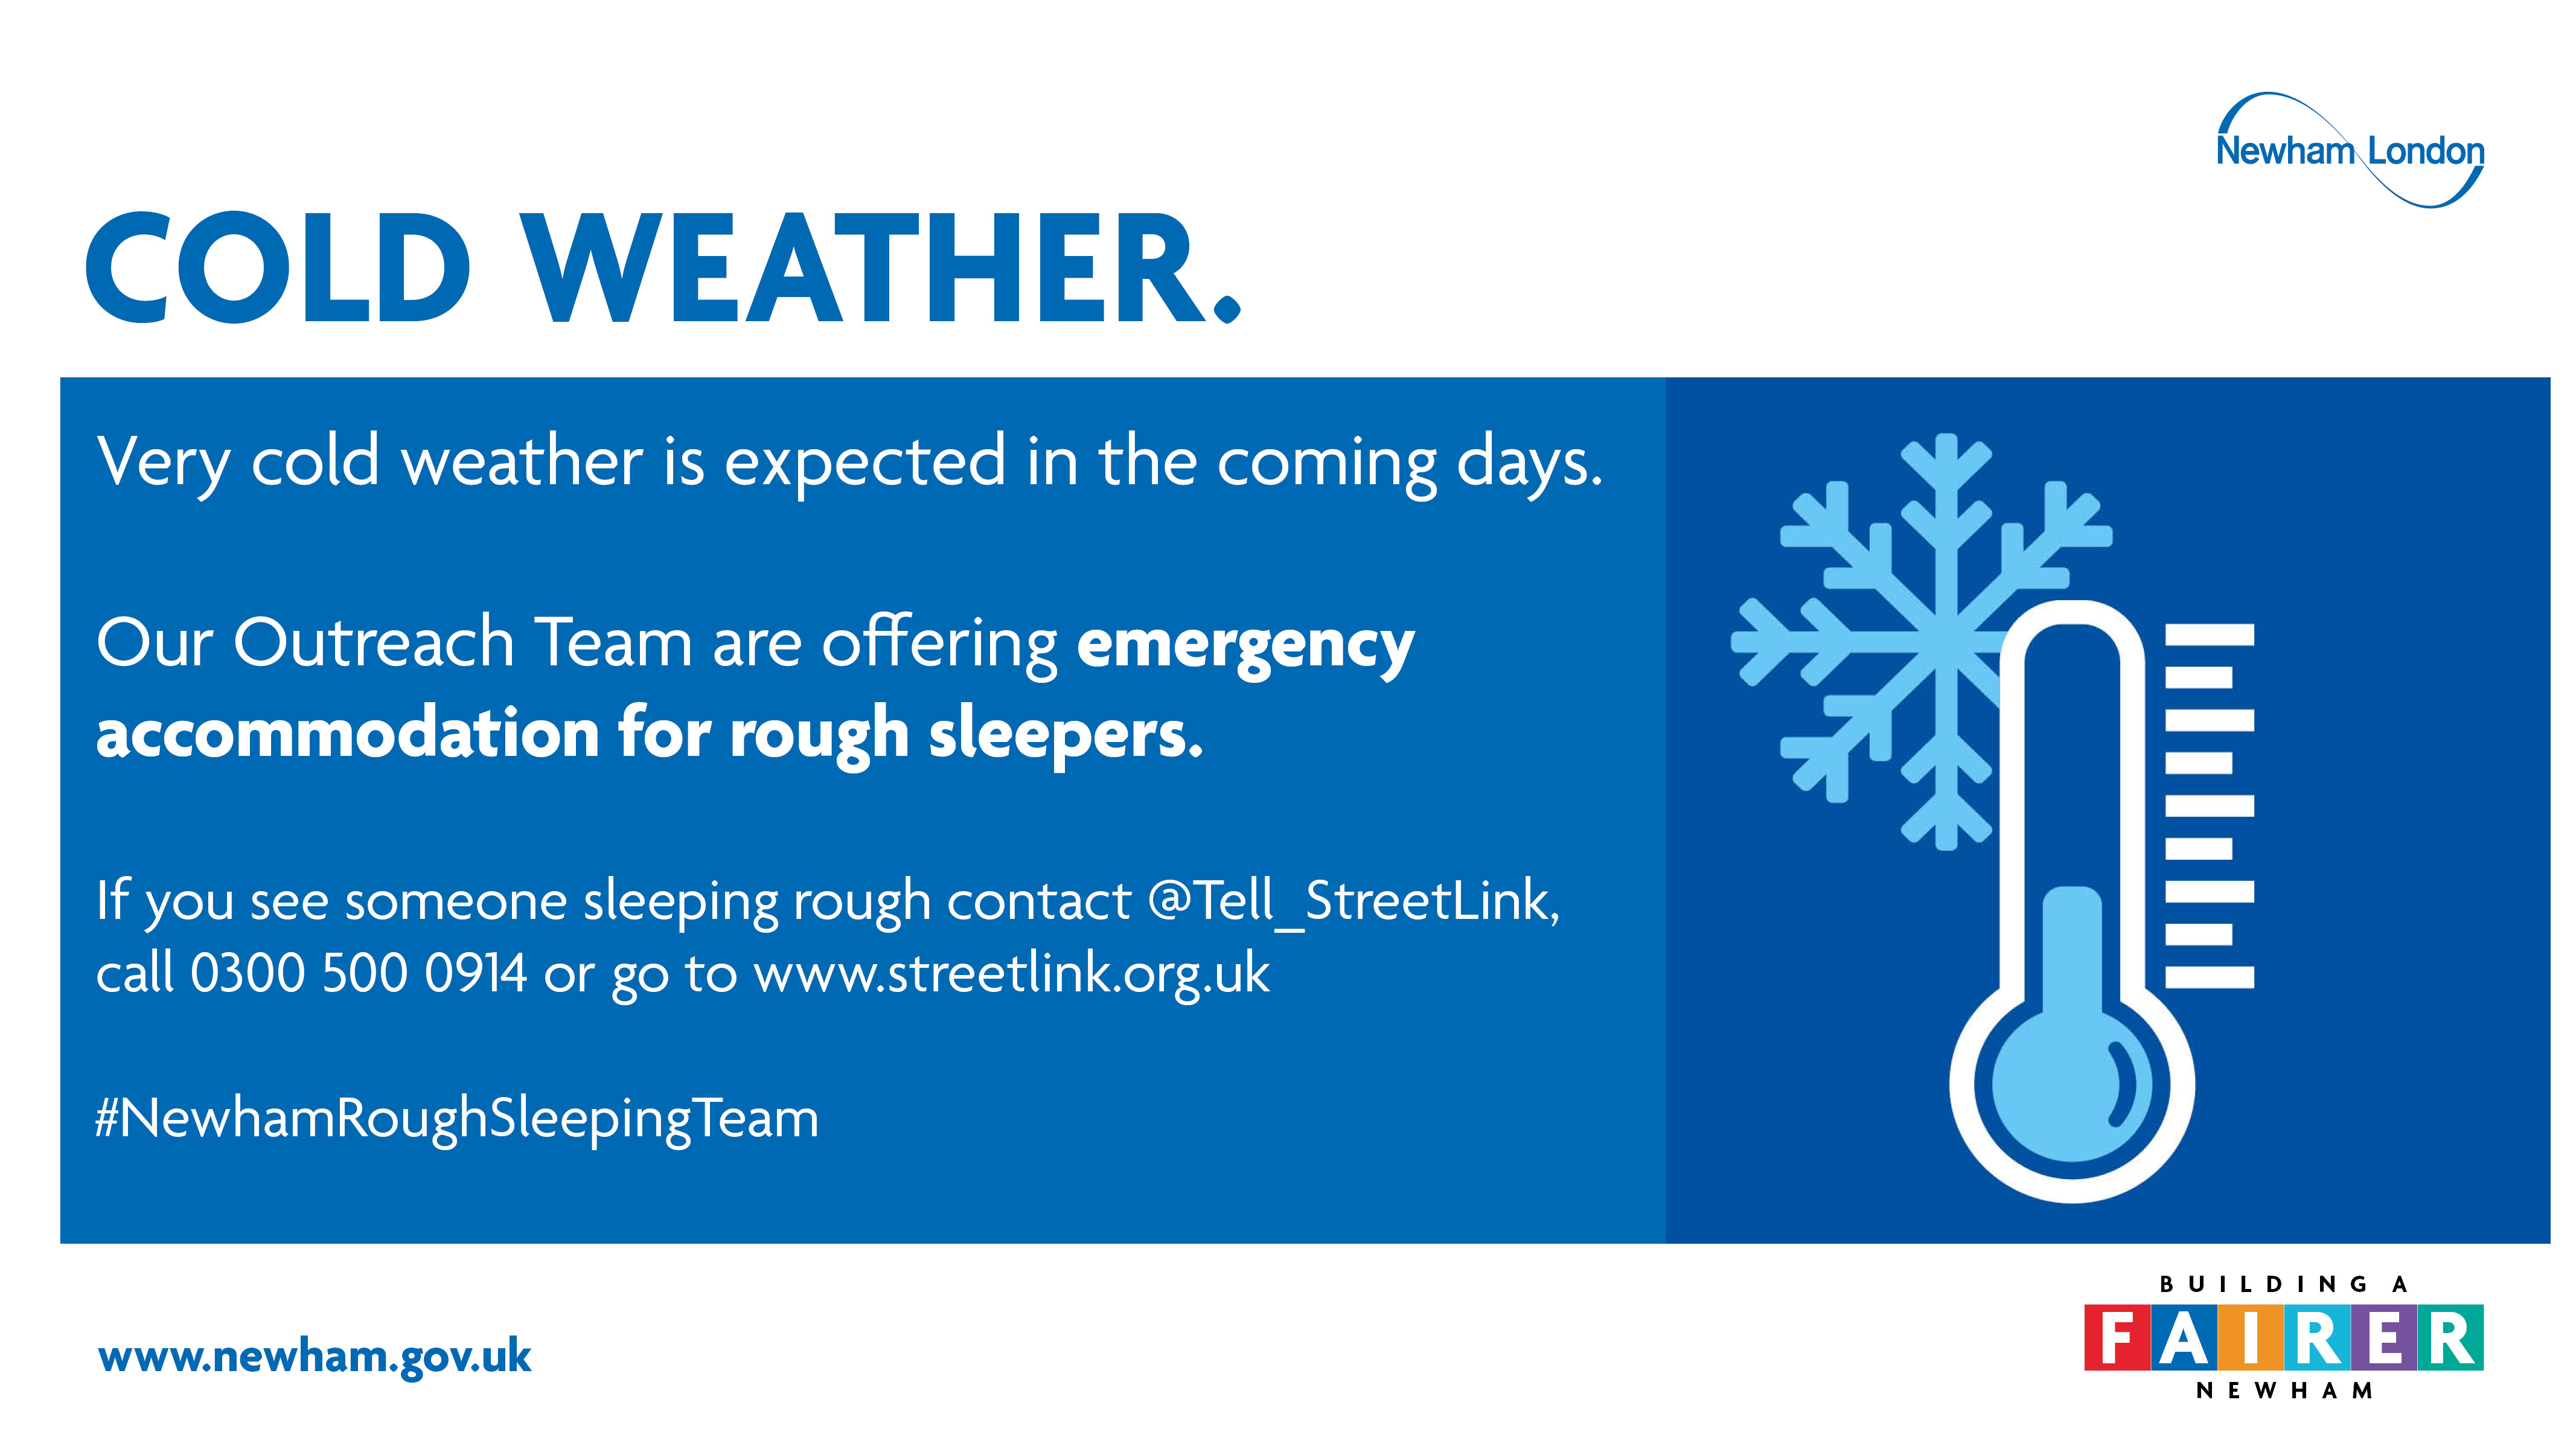 Very cold weather is expected in the coming days    Our outreach team are offering emergency accommodation for rough sleepers    If you see someone sleeping rough contact @Tell_StreetLink or 0300 500 0914 or go to www.streetlink.org.uk